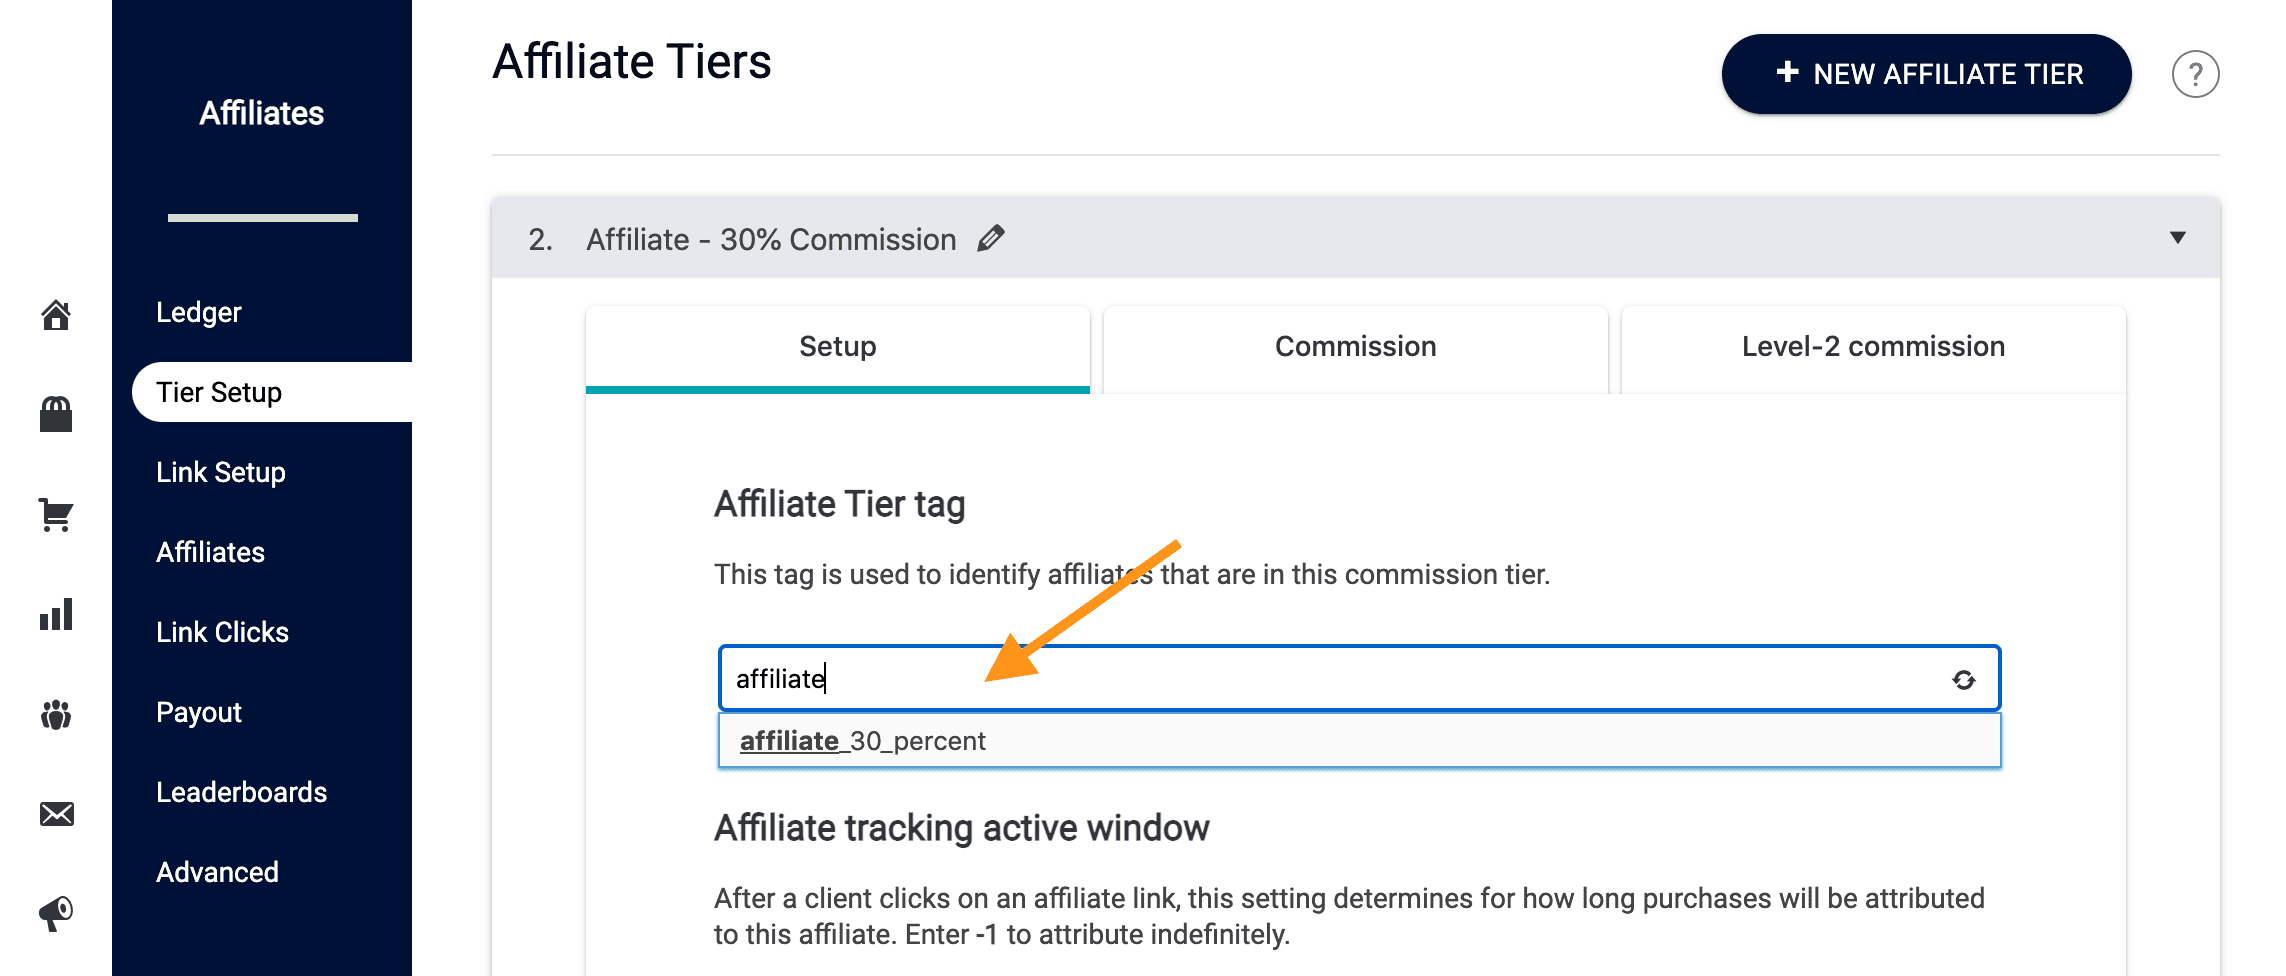 Screenshot of how to assian an affiliate tier tag